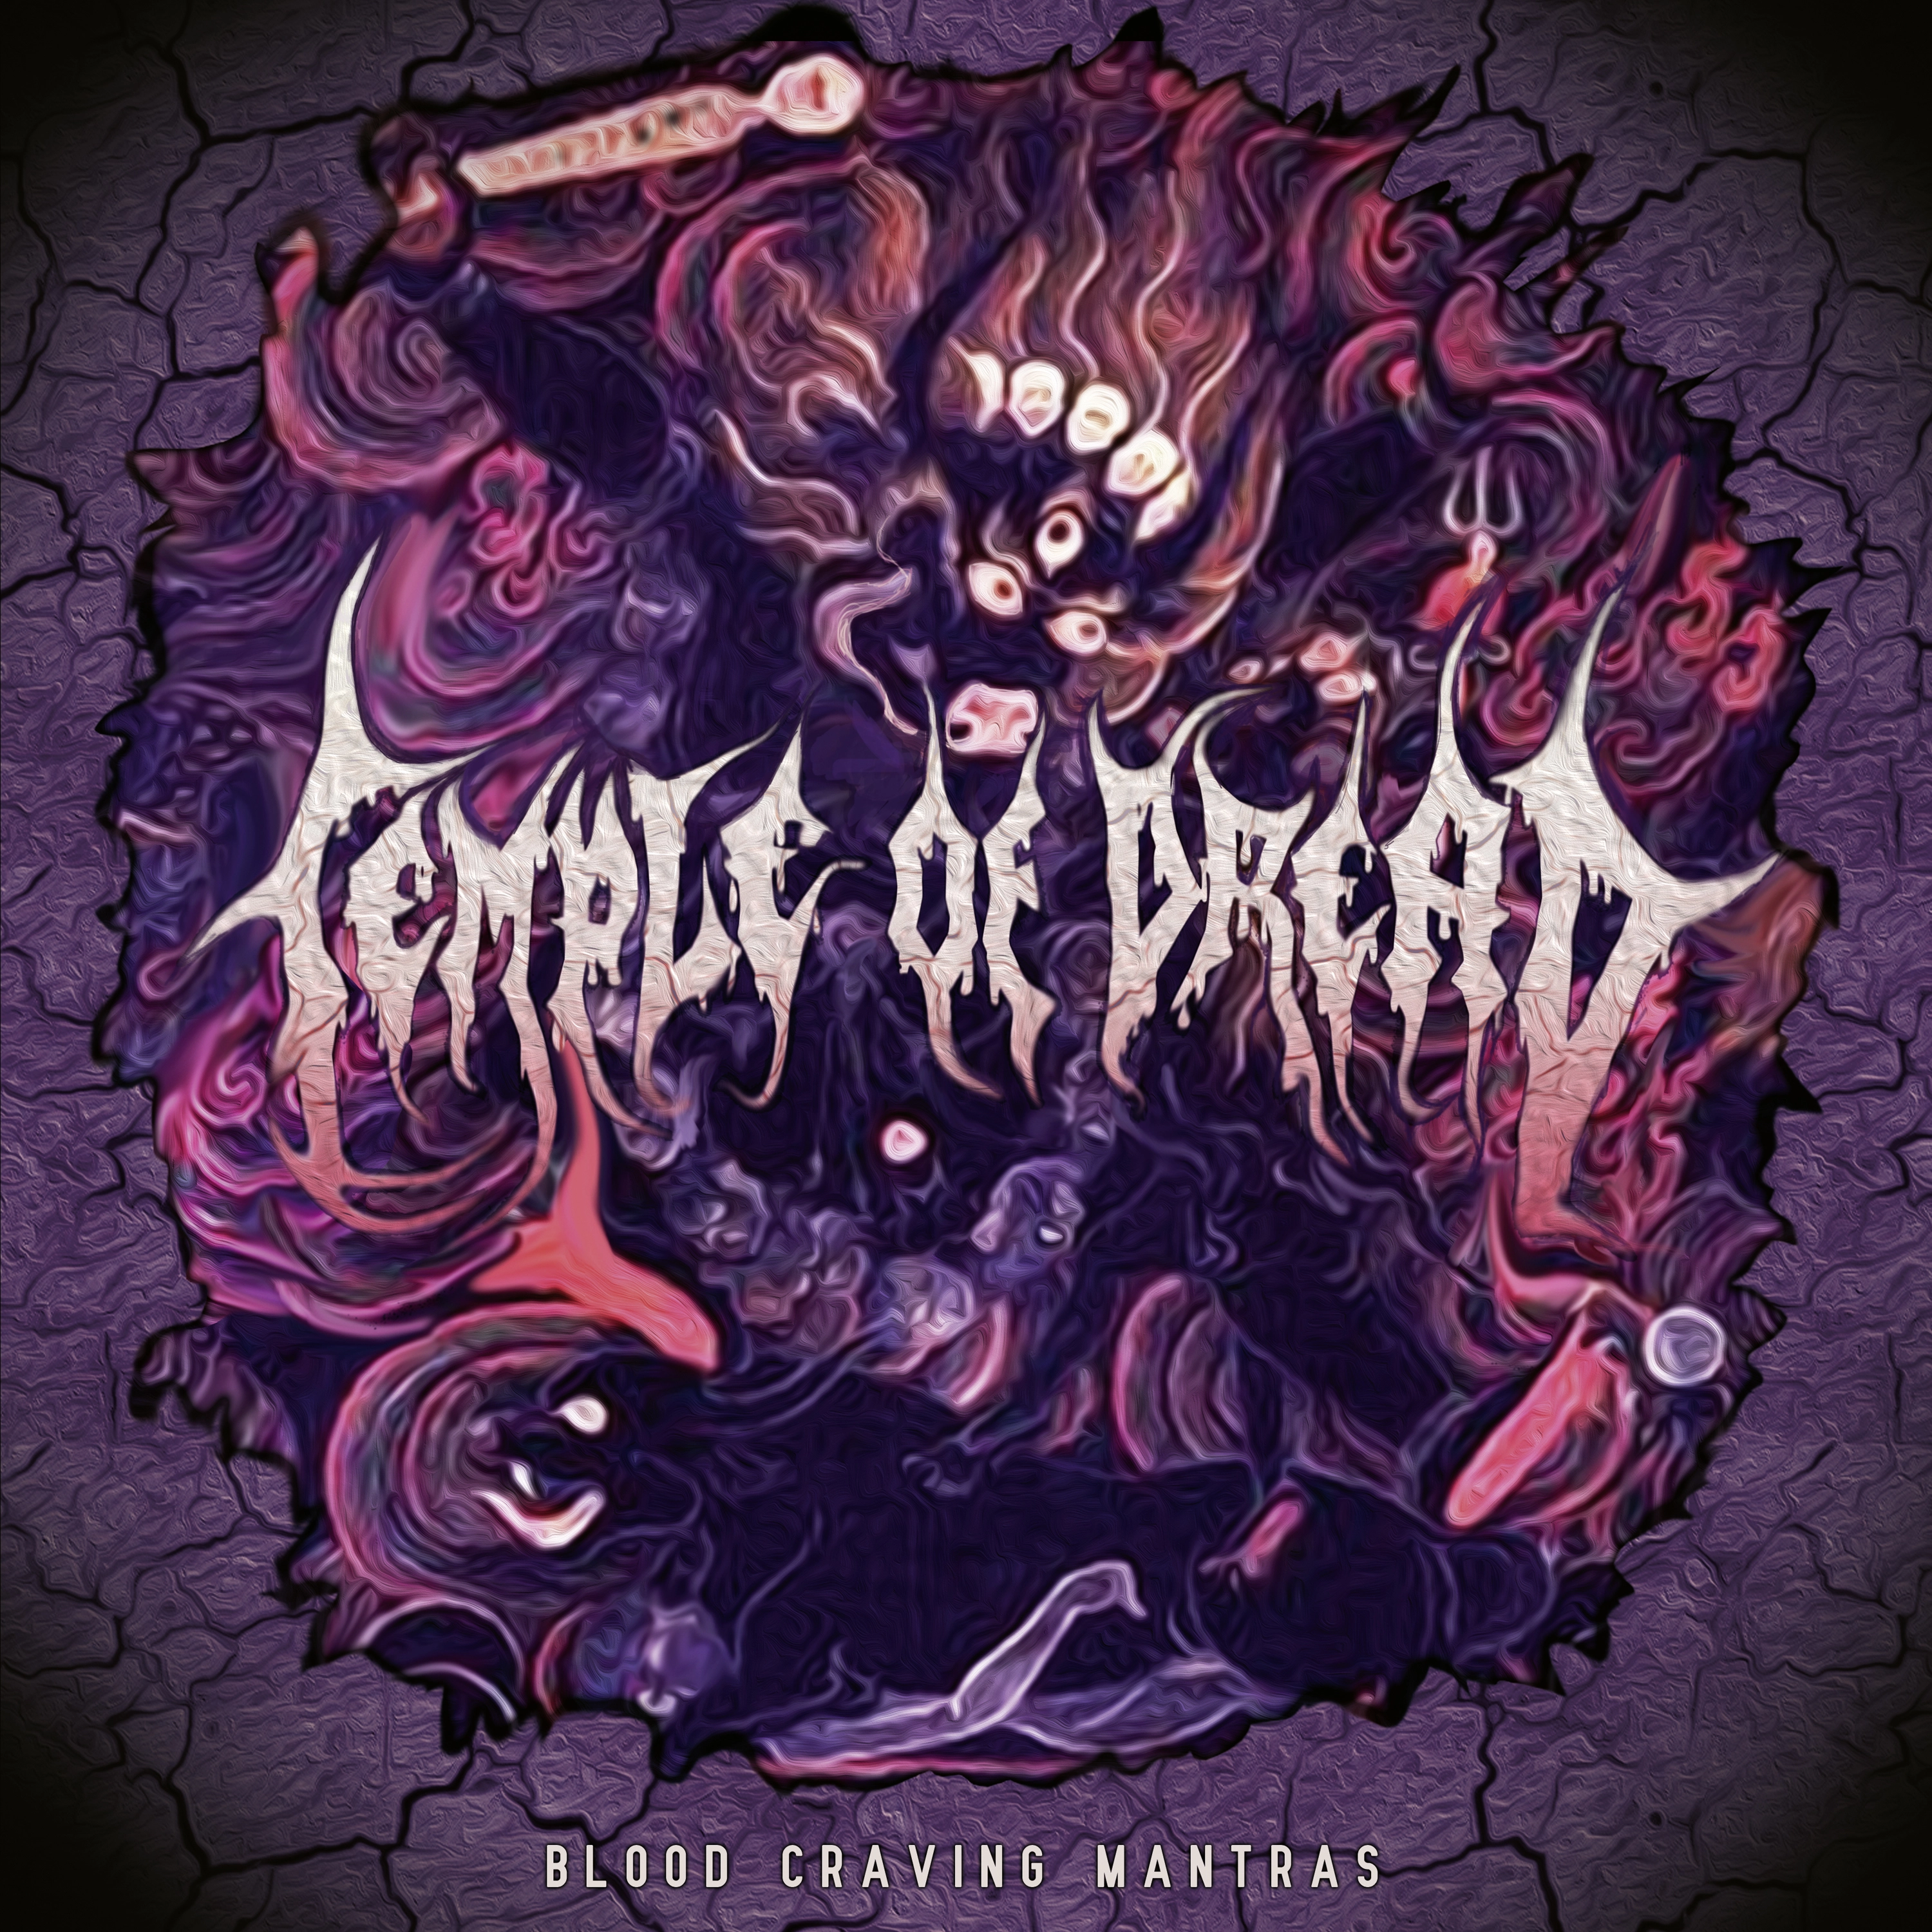 TEMPLE OF DREAD - Blood Craving Mantras [CD]